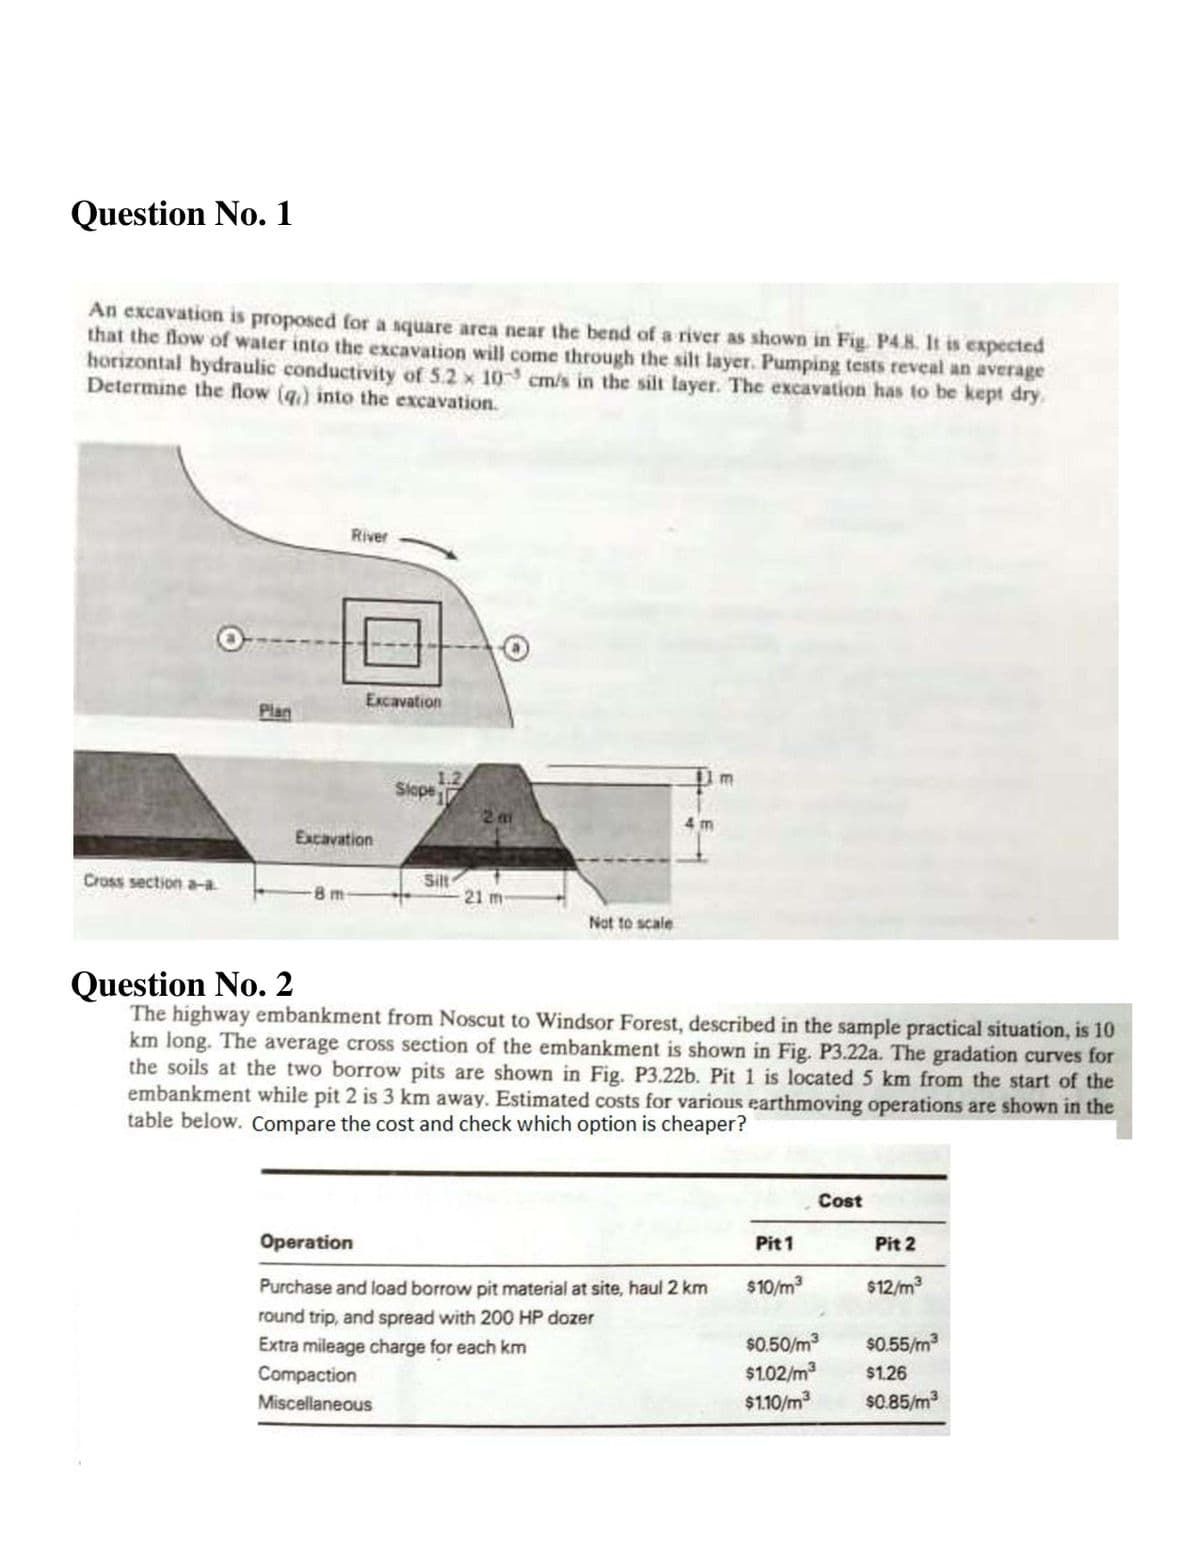 Question No. 1
An excavation is proposed for a square arca near the bend of a river as shown in Fig. P4.8. It is expected
that the flow of water into the excavation will come through the silt layer. Pumping tests reveal an average
horizontal bydraulic conductivity of 5.2 x 10 cm/s in the silt layer. The excavation has to be kept dry.
Determine the flow (q) into the excavation.
River
Excavation
Plan
1.2
Slape
Excavation
Silt
21 m
Cross section a-a
8 m
Not to scale
Question No. 2
The highway embankment from Noscut to Windsor Forest, described in the sample practical situation, is 10
km long. The average cross section of the embankment is shown in Fig. P3.22a. The gradation curves for
the soils at the two borrow pits are shown in Fig. P3.22b. Pit 1 is located 5 km from the start of the
embankment while pit 2 is 3 km away. Estimated costs for various earthmoving operations are shown in the
table below. Compare the cost and check which option is cheaper?
Cost
Operation
Pit 1
Pit 2
Purchase and load borrow pit material at site, haul 2 km
$10/m3
$12/m3
round trip, and spread with 200 HP dozer
$0.50/m3
$102/m
$10/m
$0.55/m3
Extra mileage charge for each km
Compaction
$1.26
Miscellaneous
$0.85/m3
